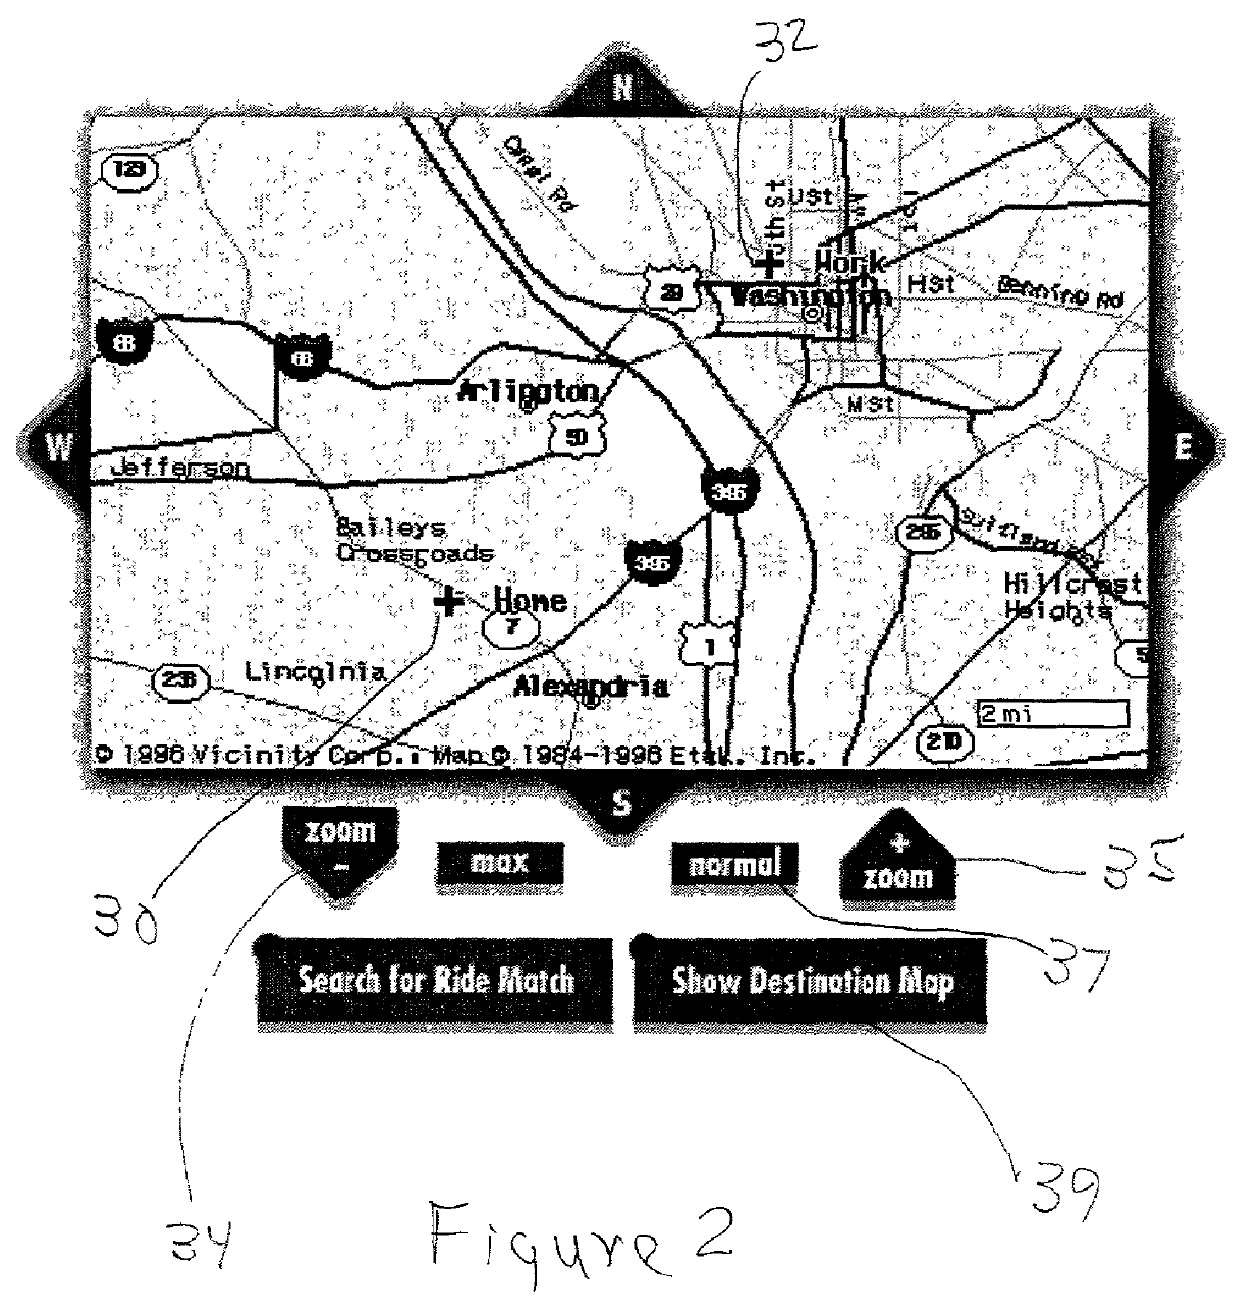 System for providing ride matching services using e-mail and the internet